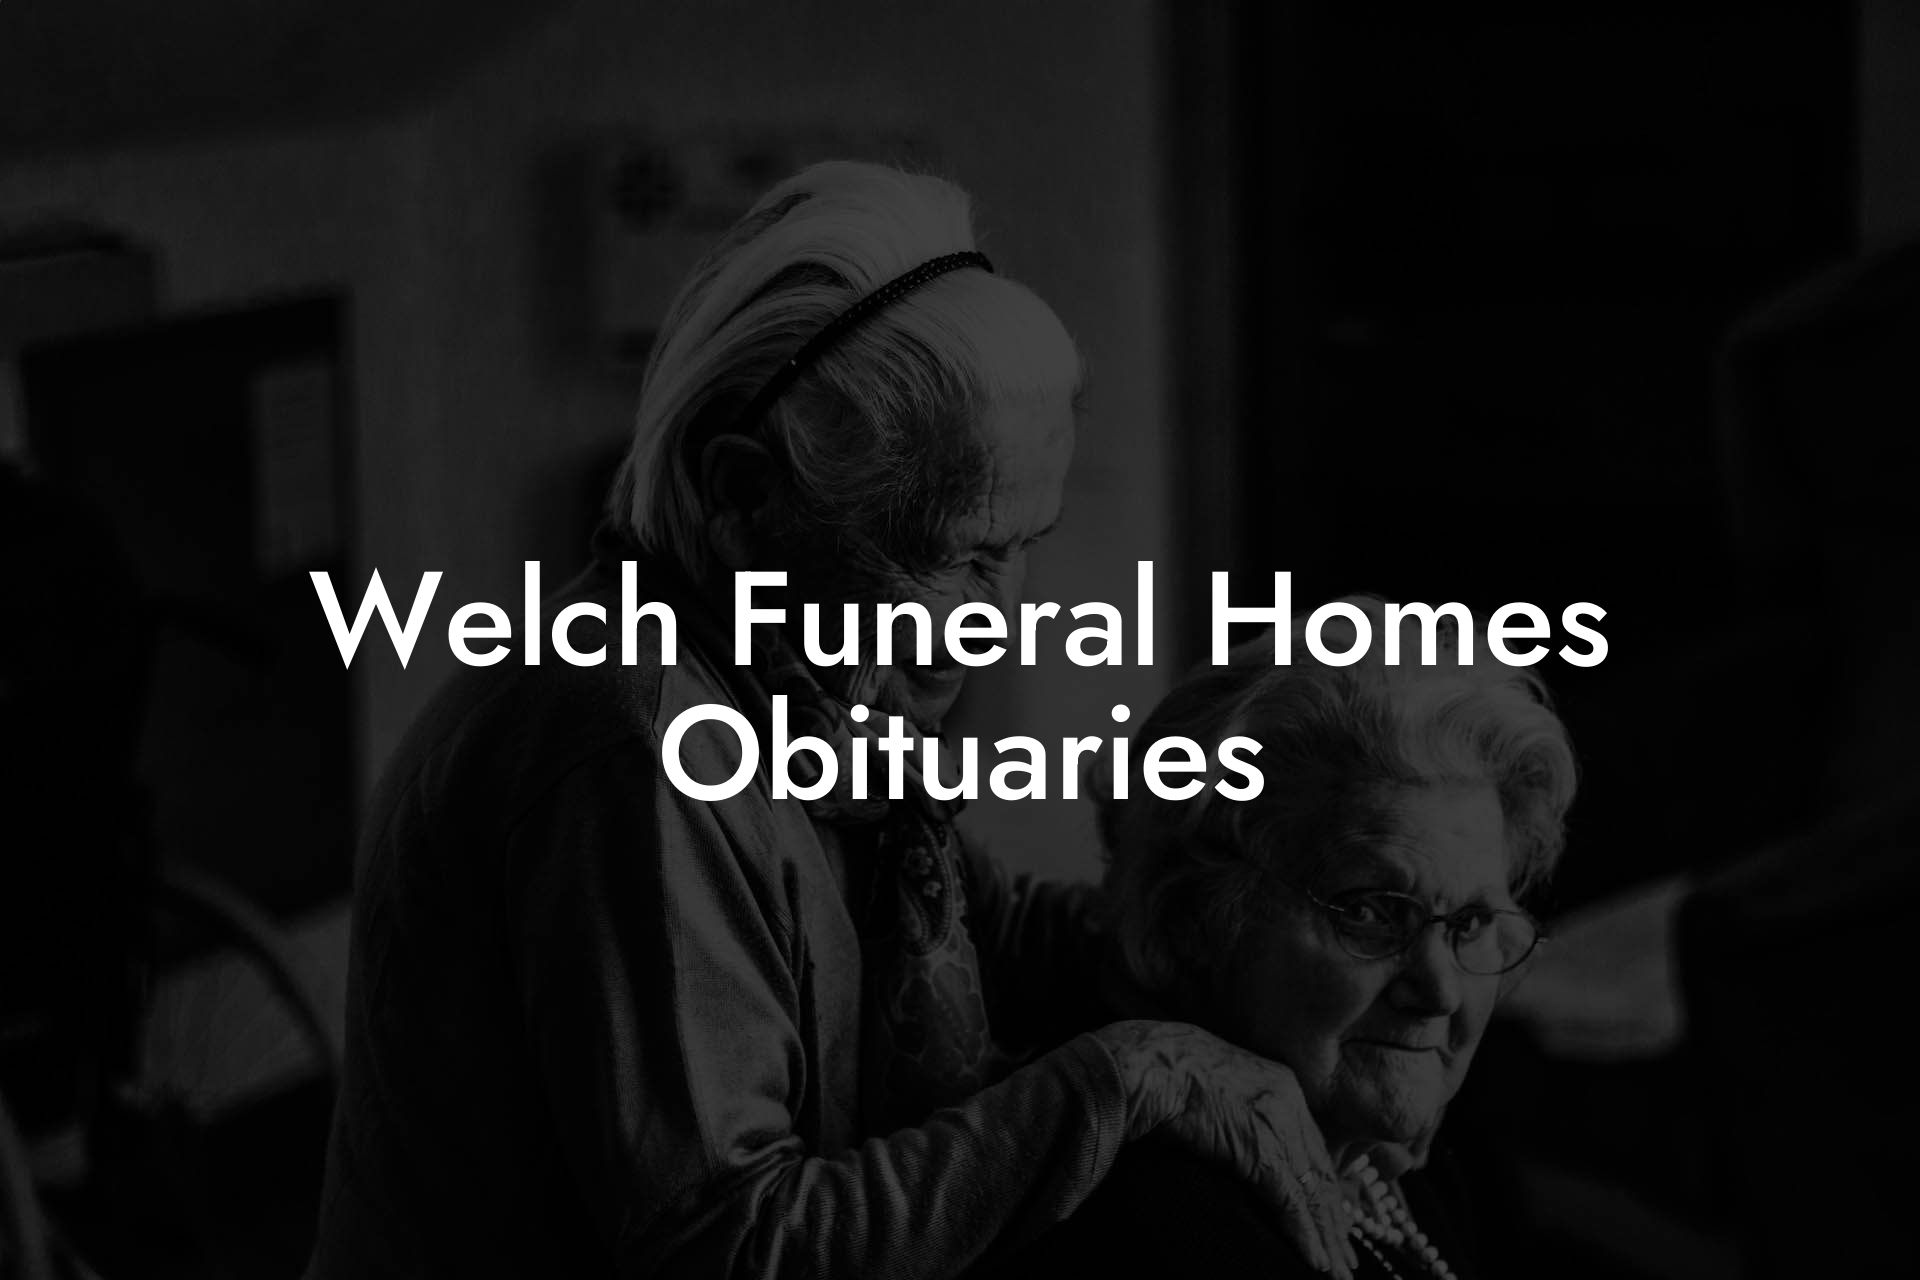 Welch Funeral Homes Obituaries